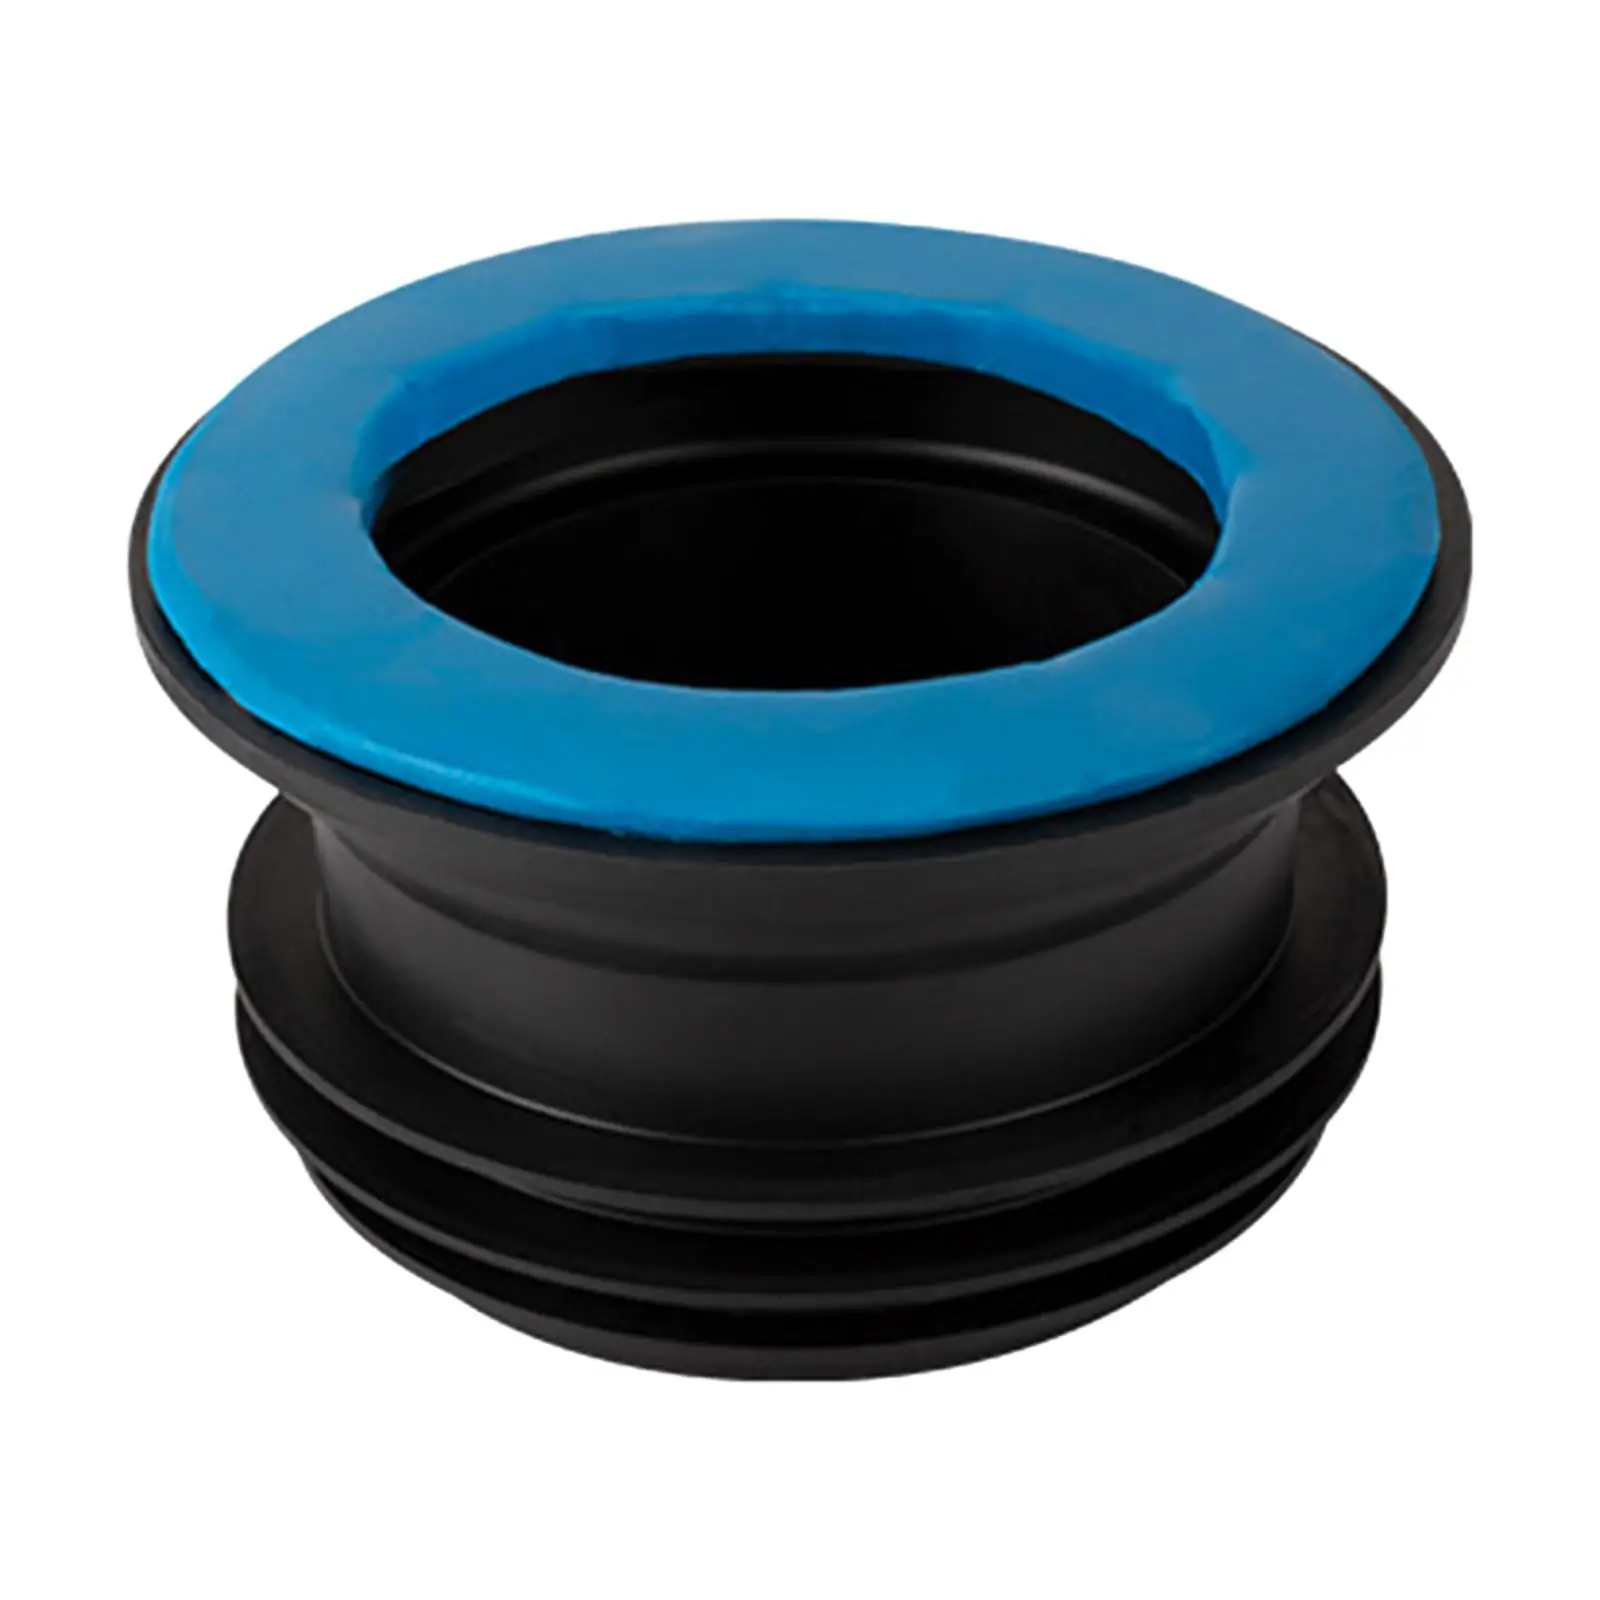 Universal Toilet Rubber Ring Seal Sealing Ring Bathroom Fitting Accessories